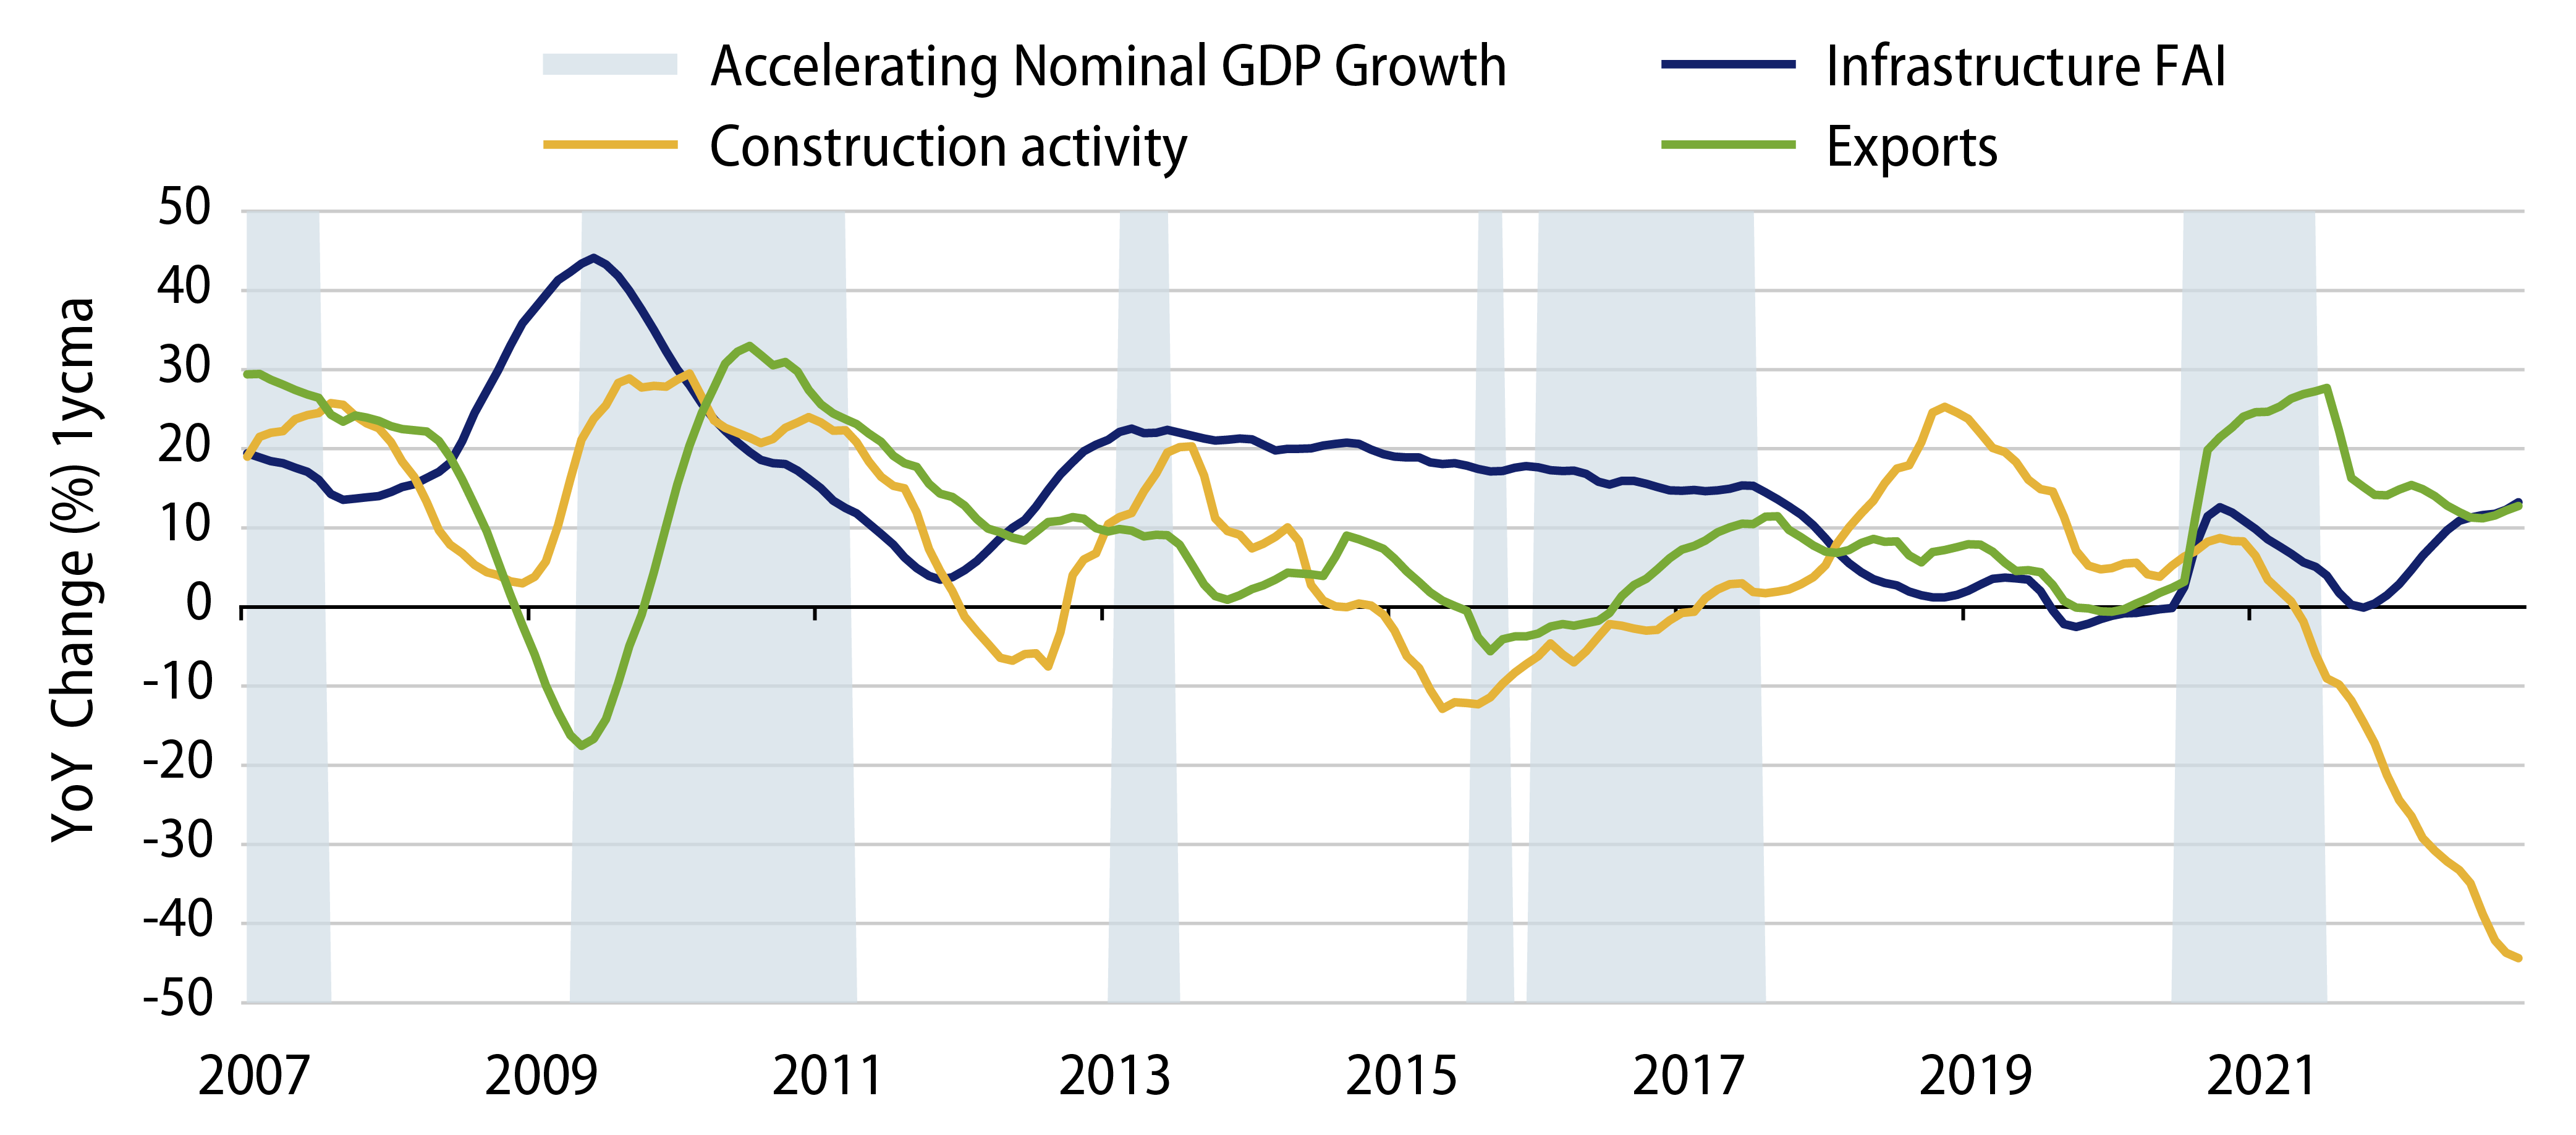 Slowdown in Real Estate Activity Is a Significant Drag on Growth